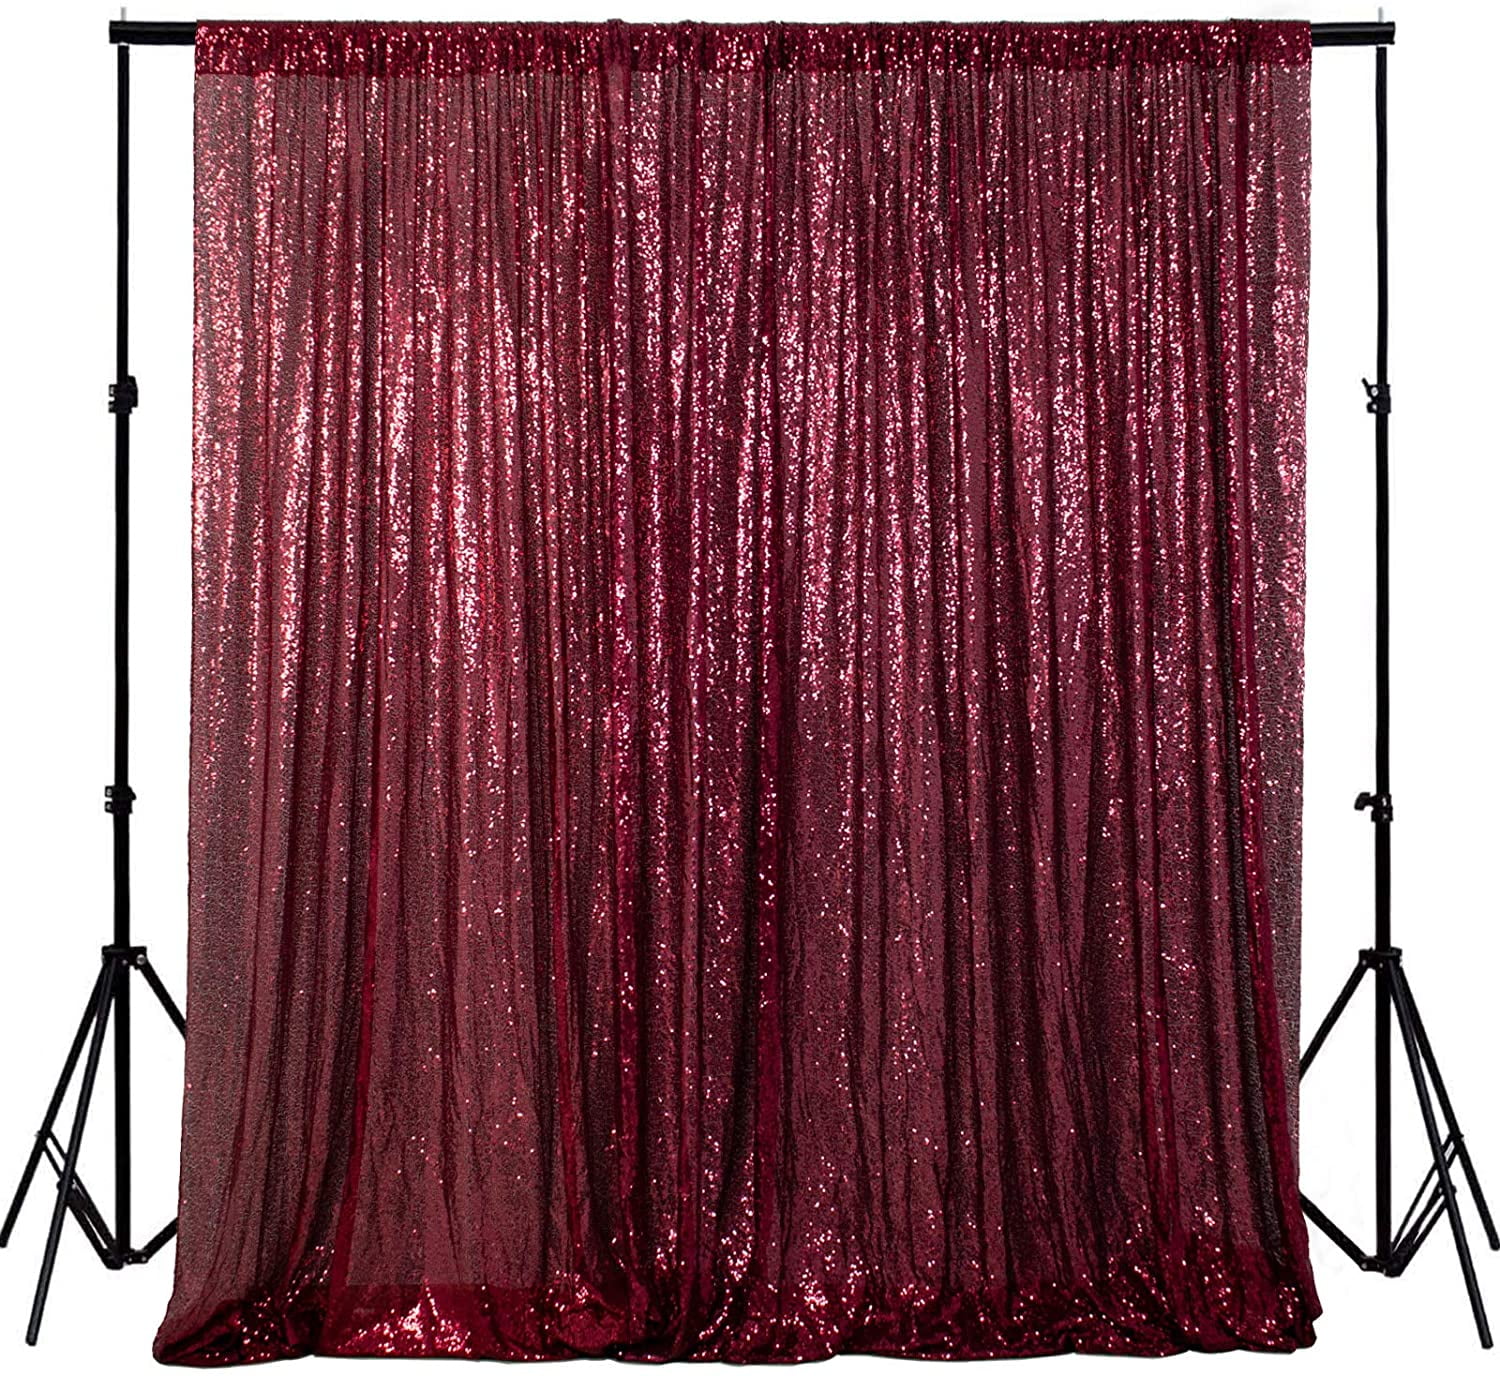 Details about   6ftx6ft Rose Gold Sequin Wedding Party Backdrop Sparkly Photography Background 